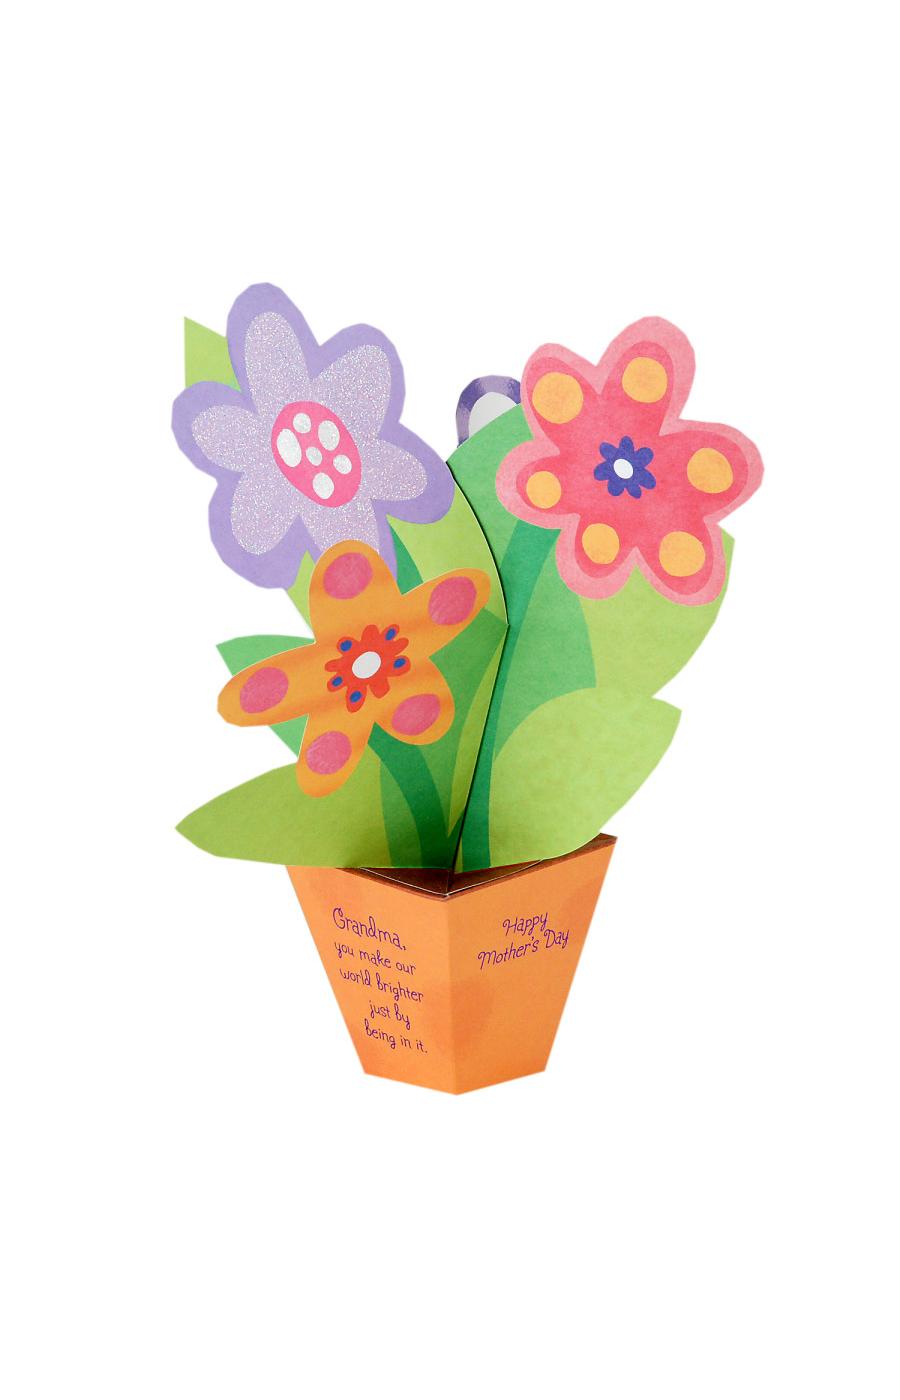 Hallmark Displayable 3D Flowers in a Pot Mother's Day Pop Up Card for Grandmother - S27; image 4 of 5